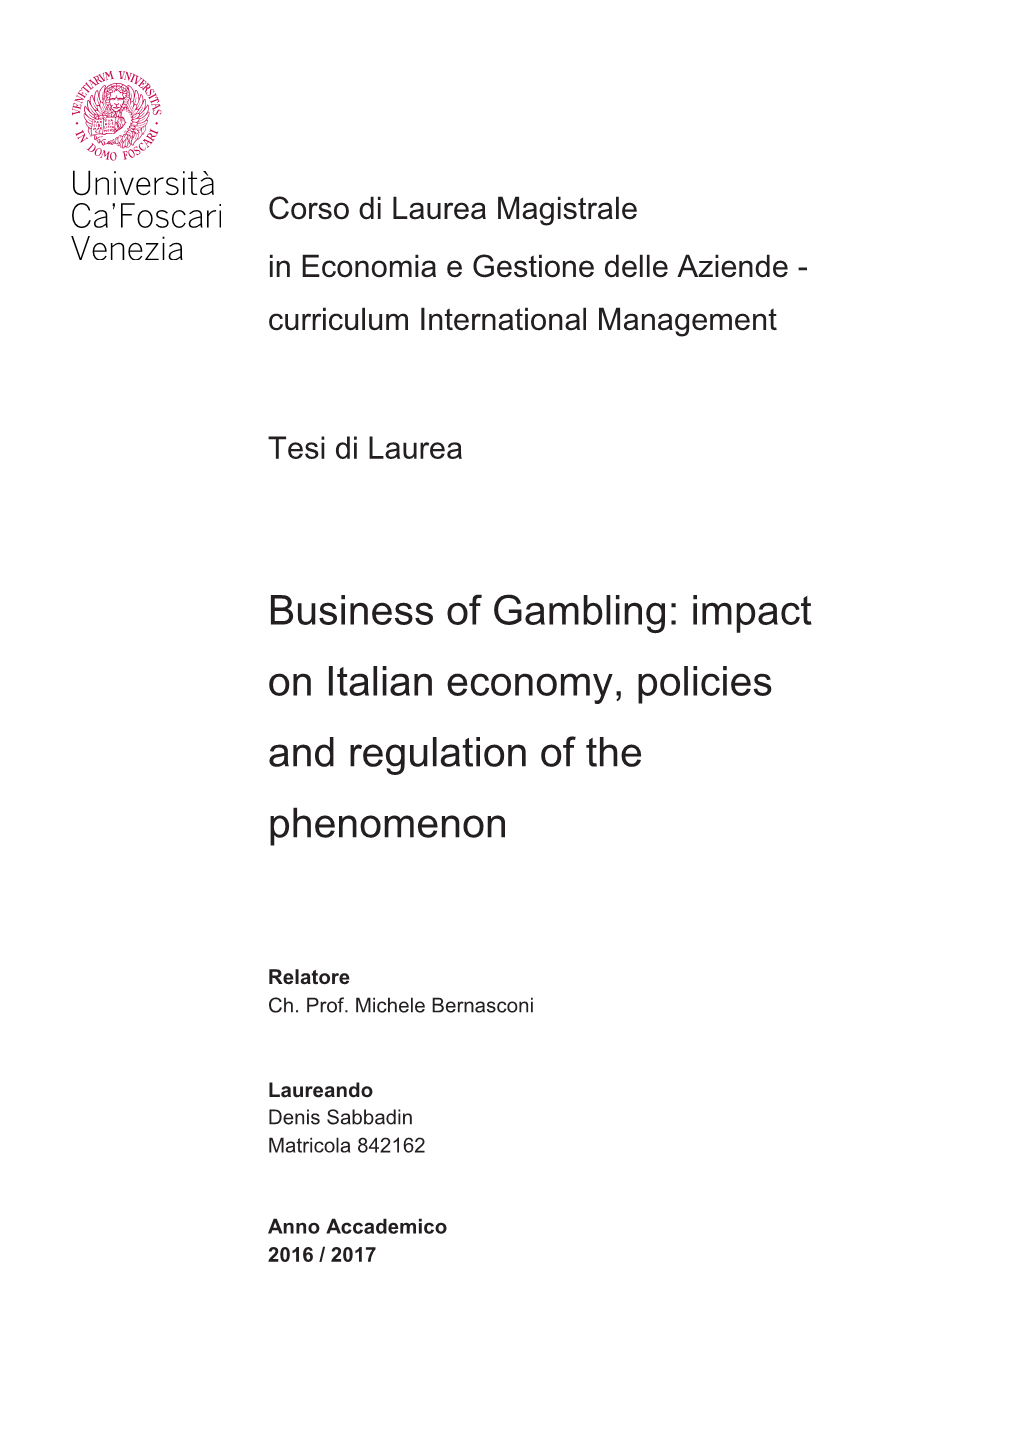 Business of Gambling: Impact on Italian Economy, Policies and Regulation of the Phenomenon